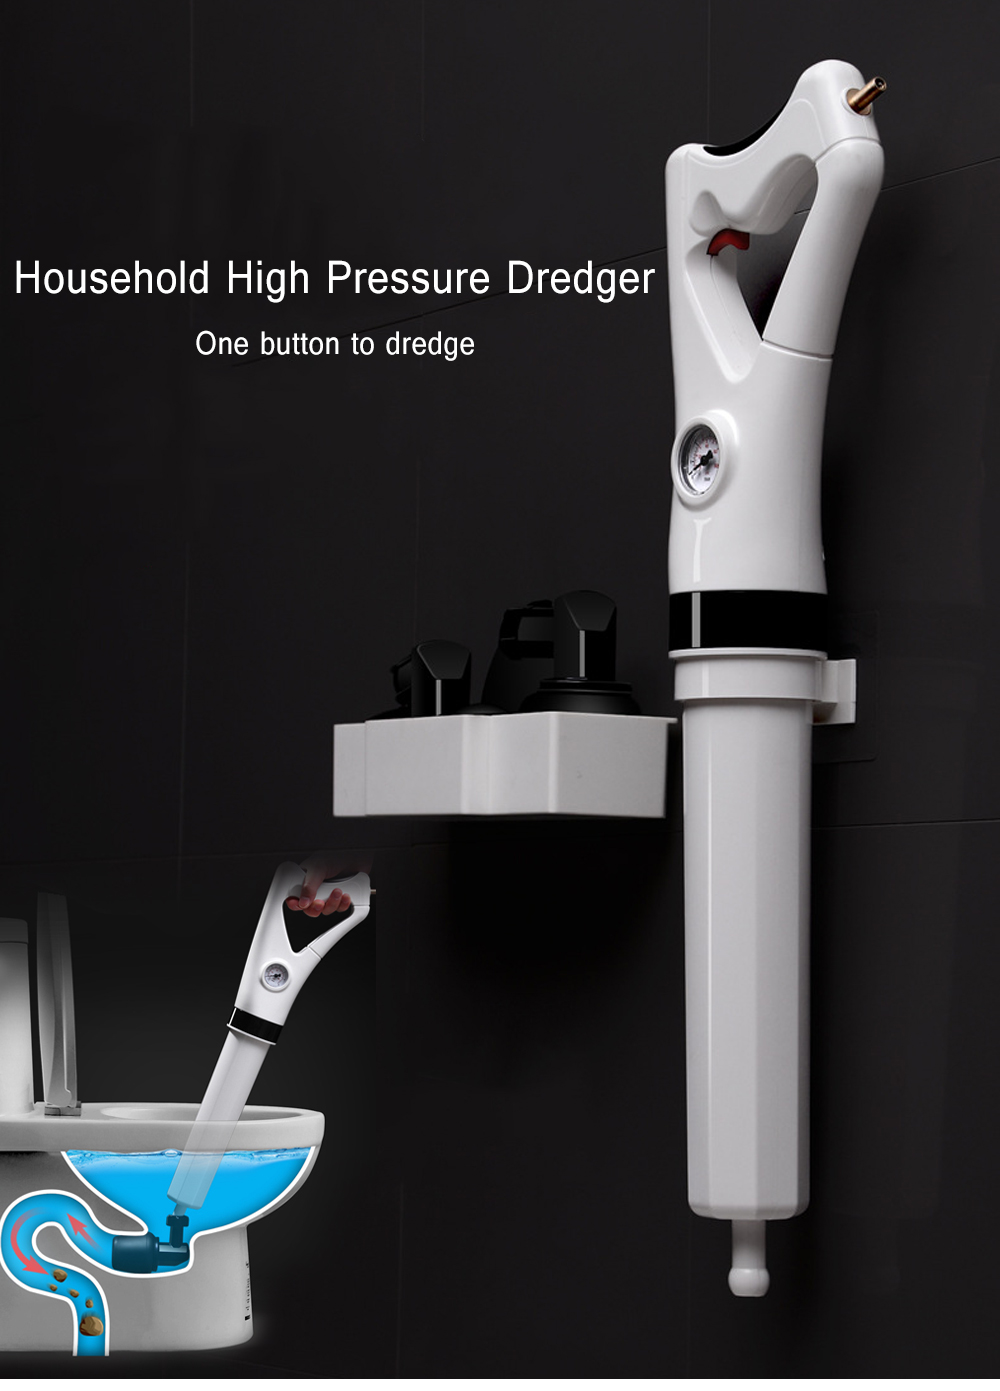 Household Toilet Sewer High Pressure Draft Dredger for Cleaning Use